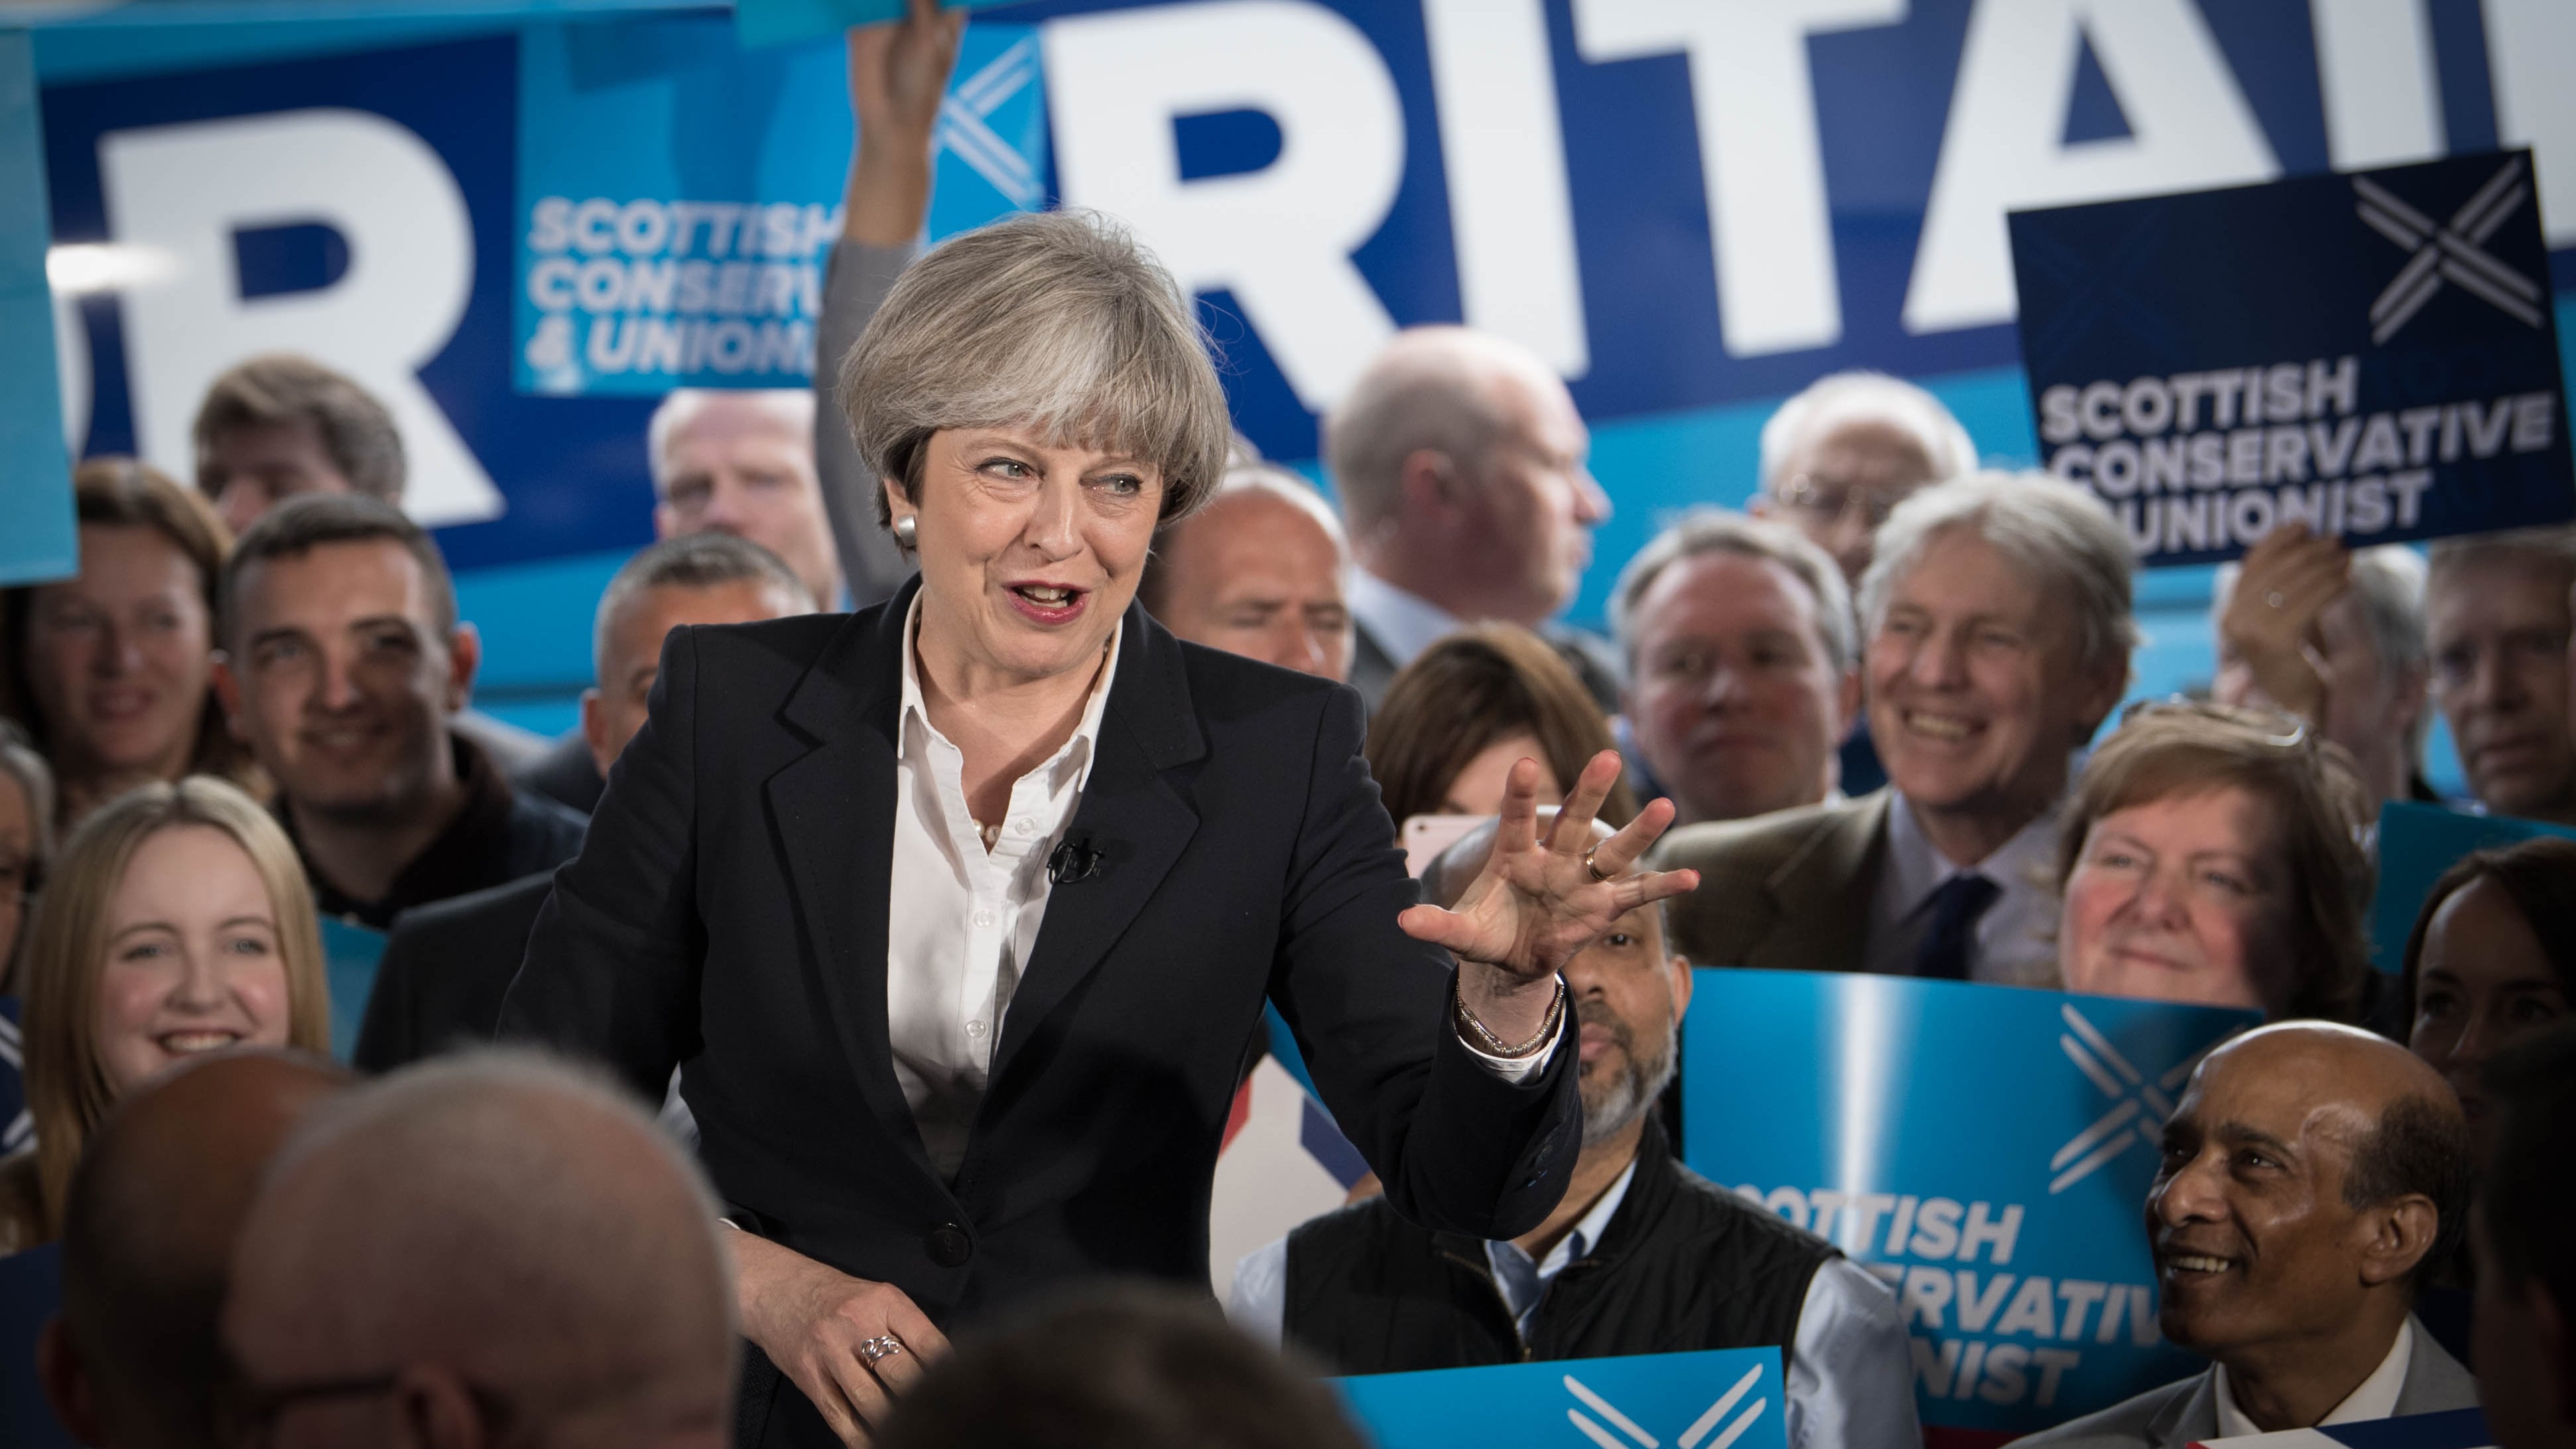 Theresa May’s 2017 election campaign was derailed by arguments over social care reform